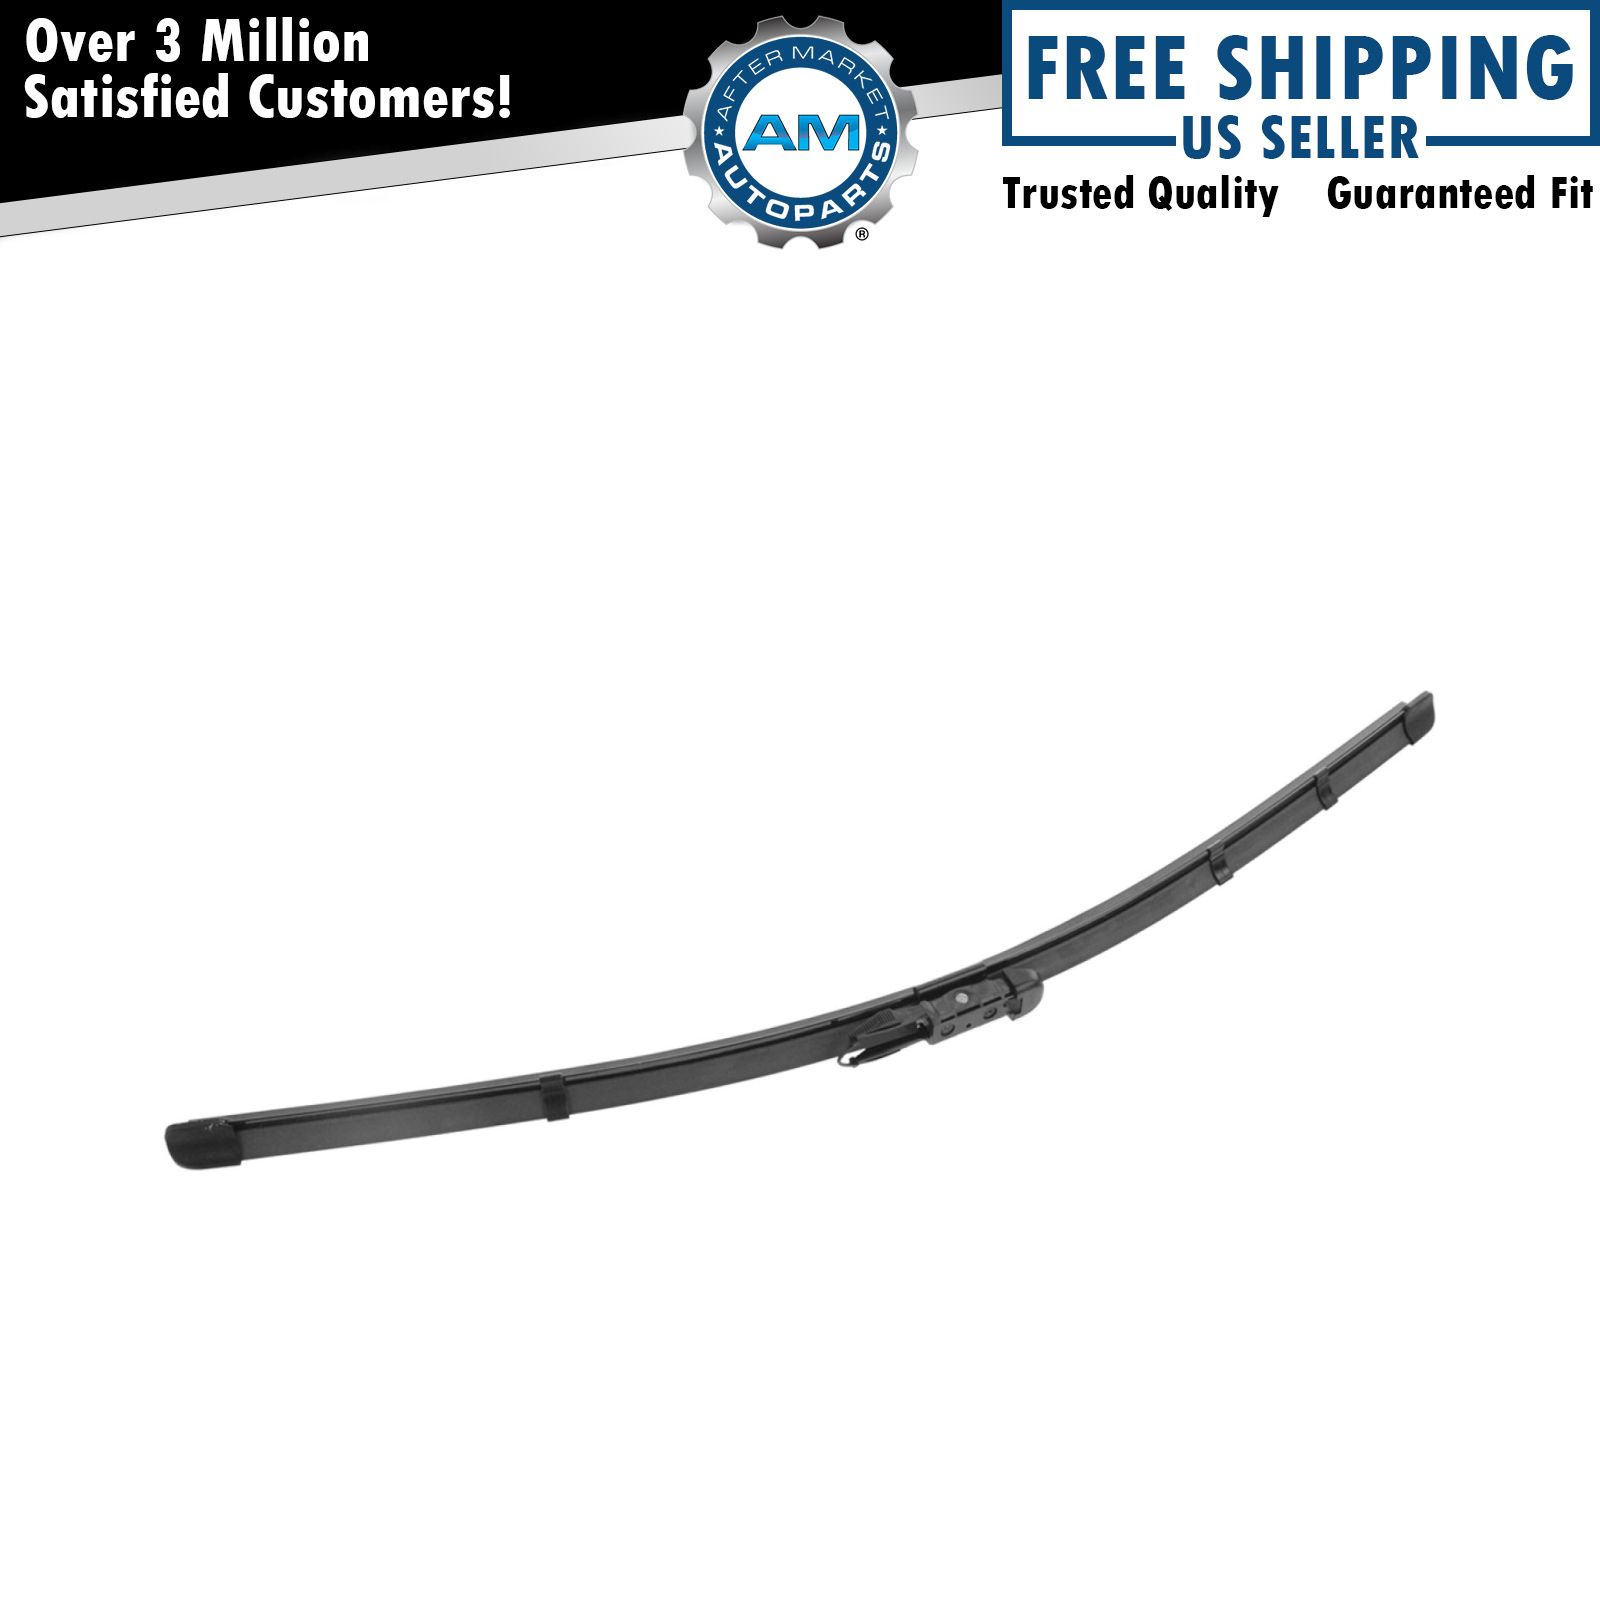 OEM 25877402 Windshield Wiper Blade Front for Chevy GMC Cadillac Truck SUV New